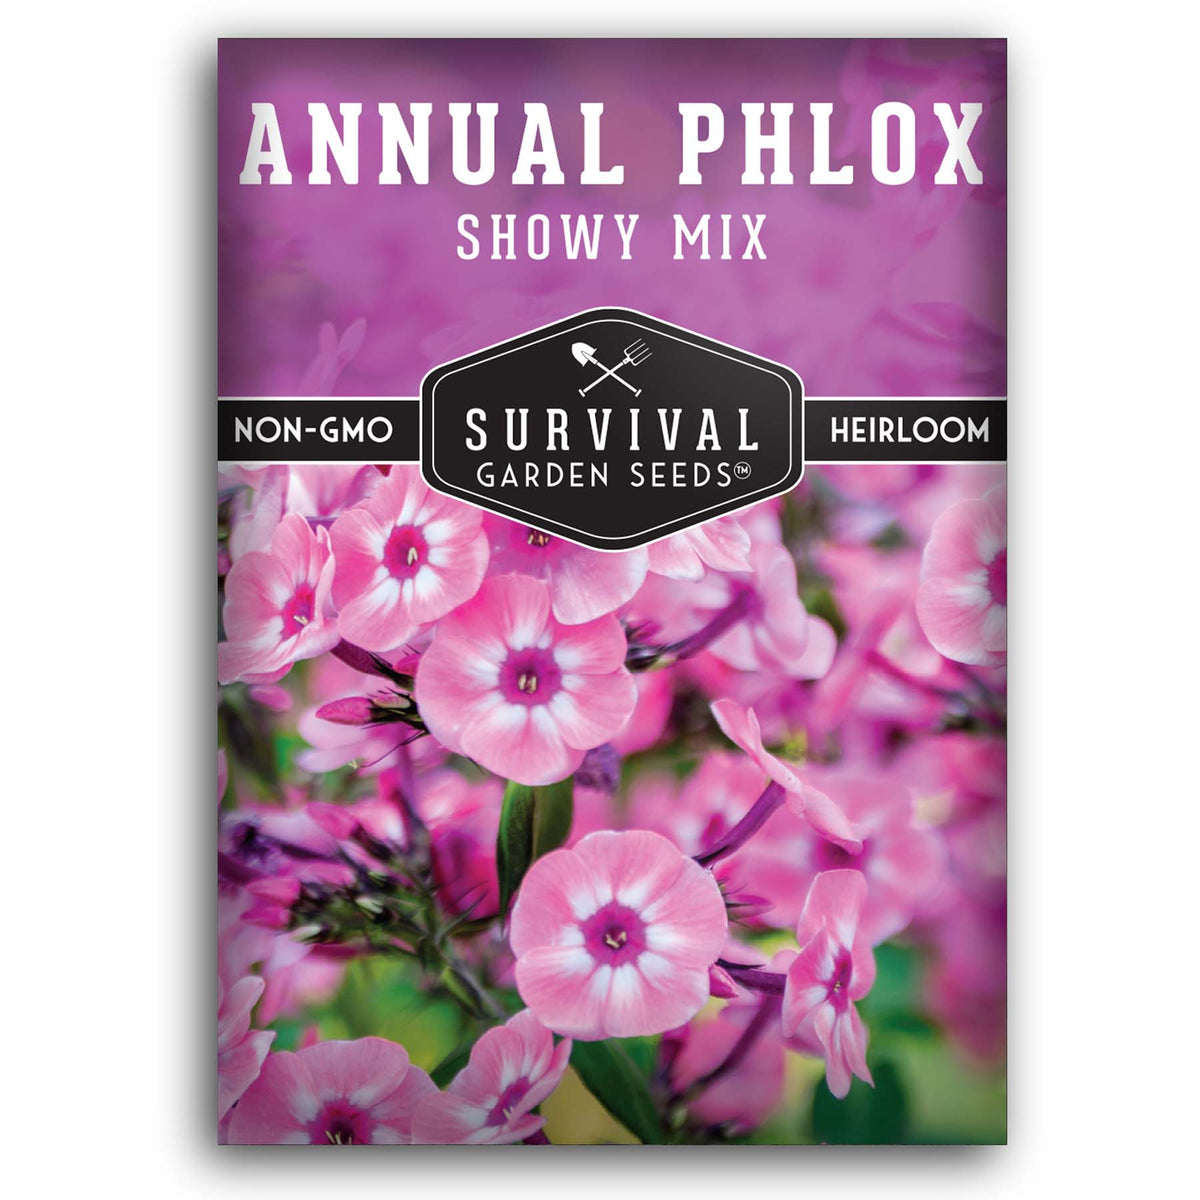 Annual Phlox seeds for planting